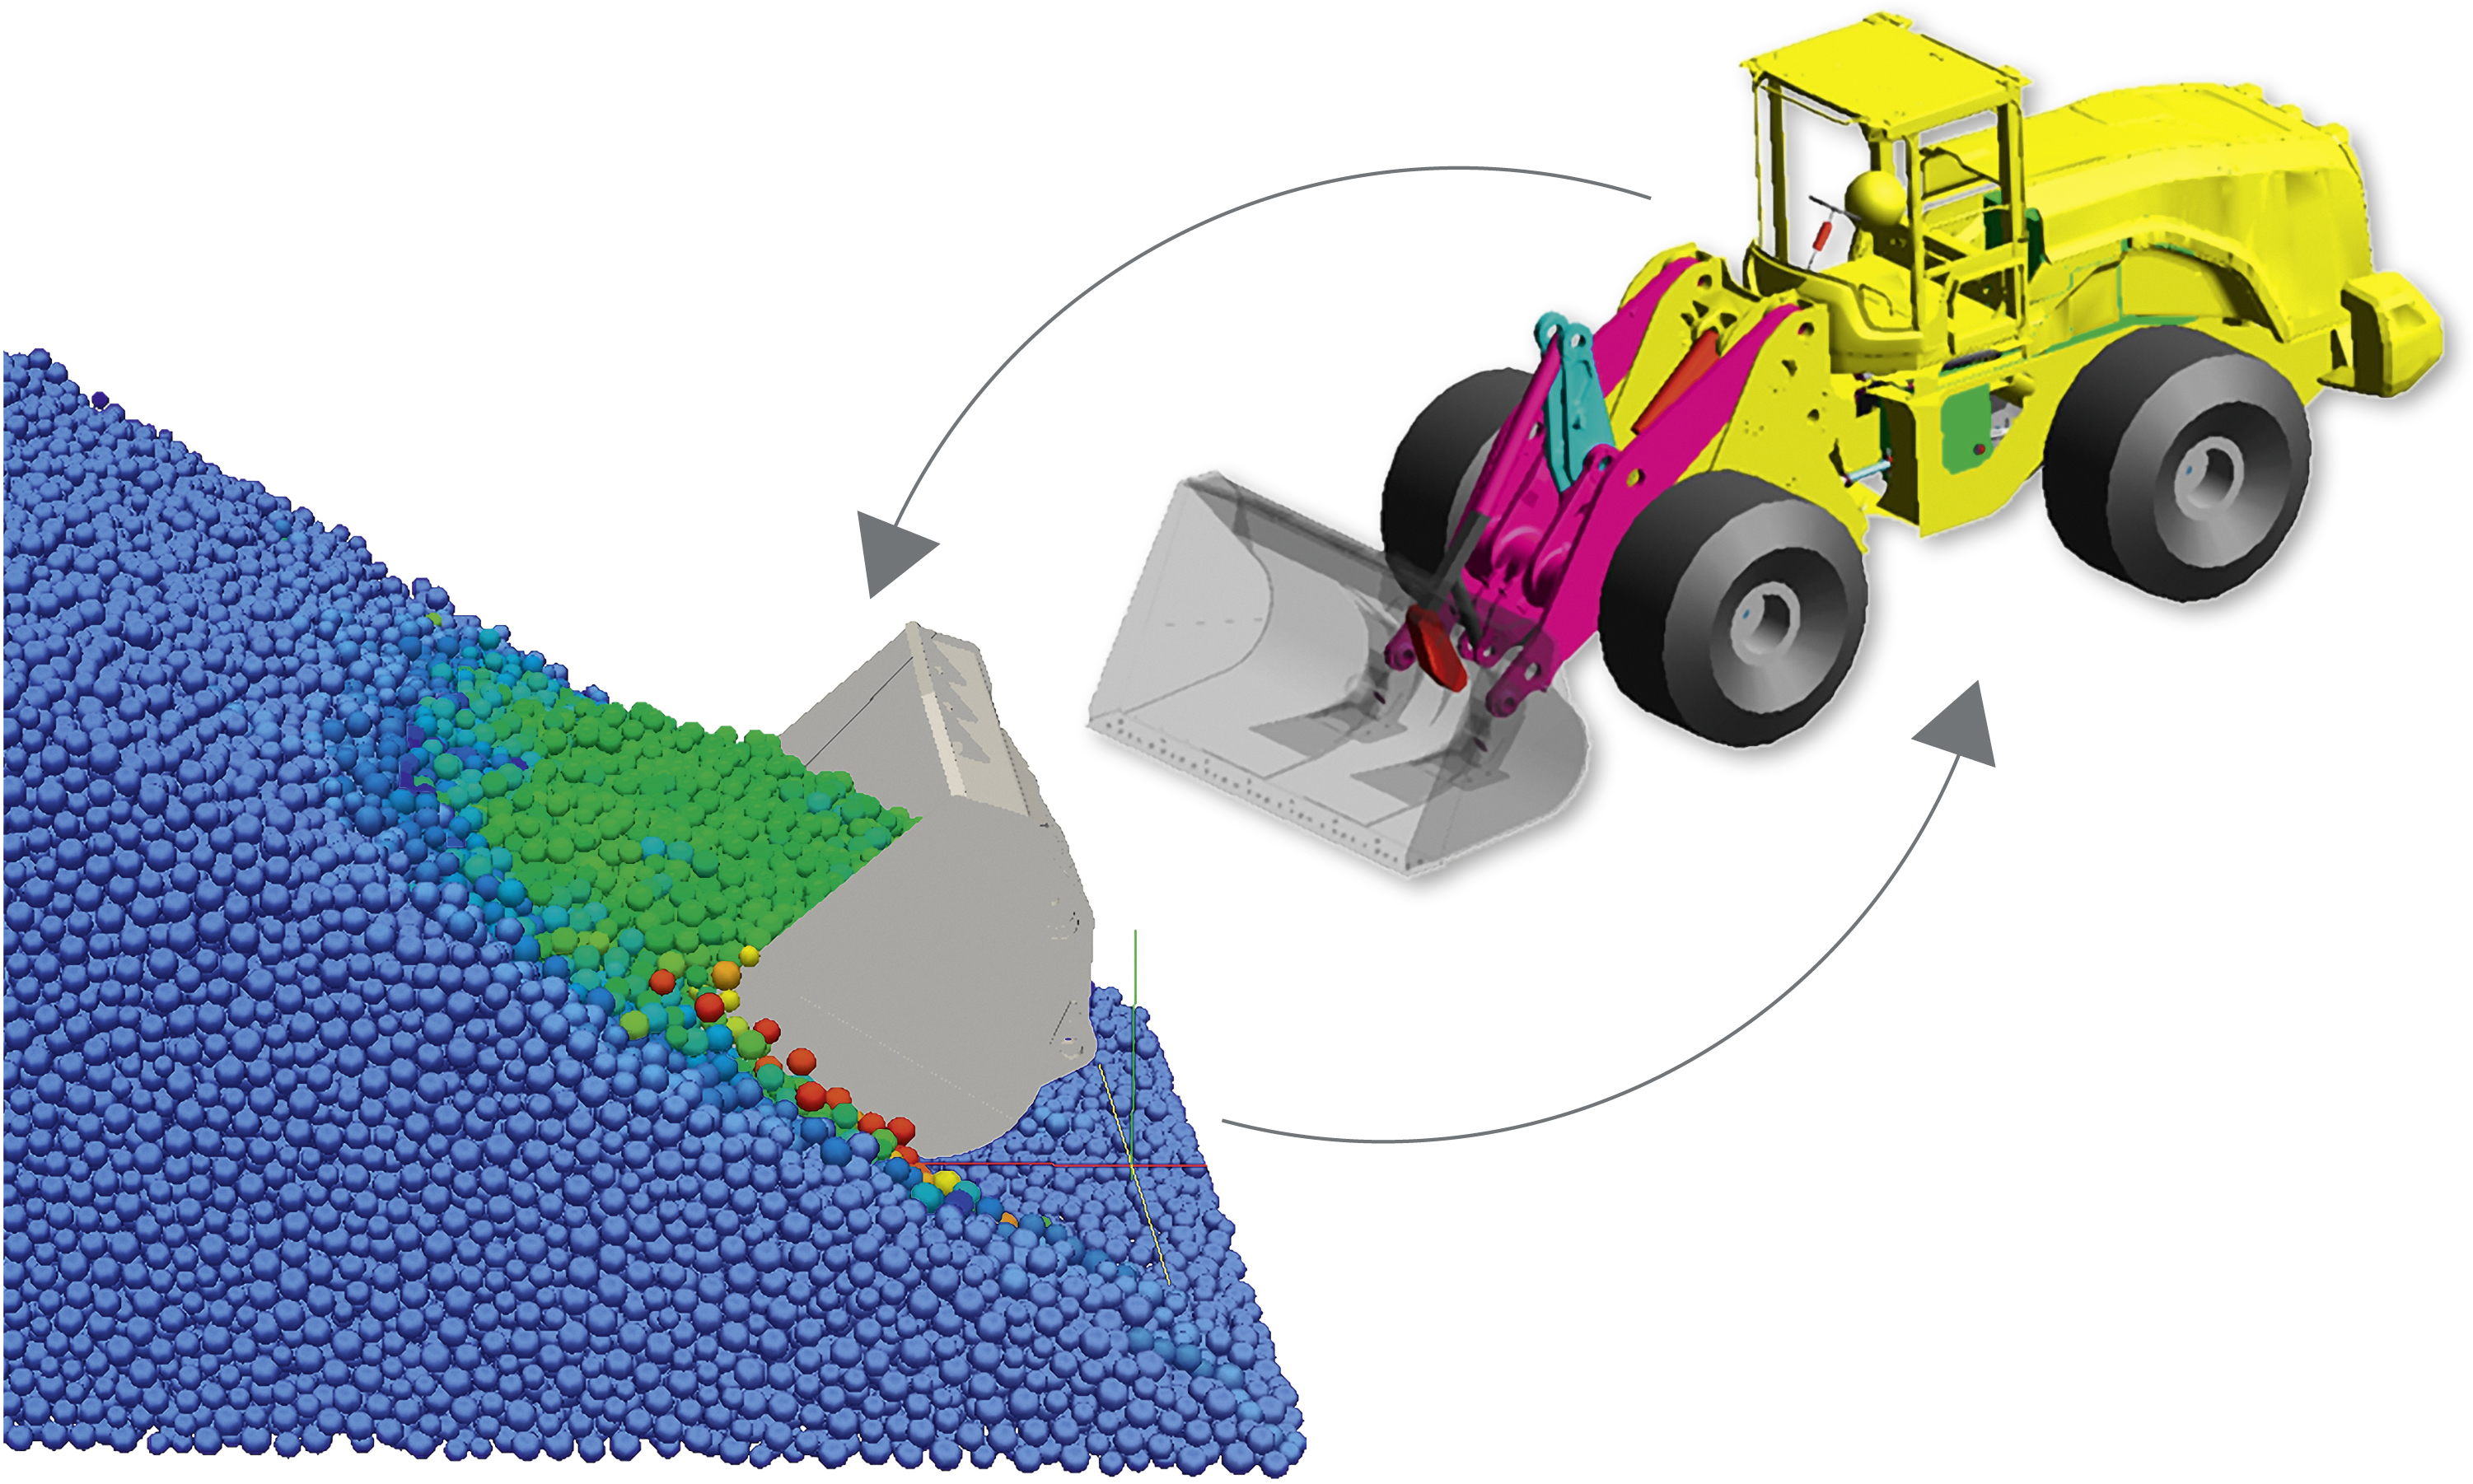 Simulation of soil and wheel loader model interaction